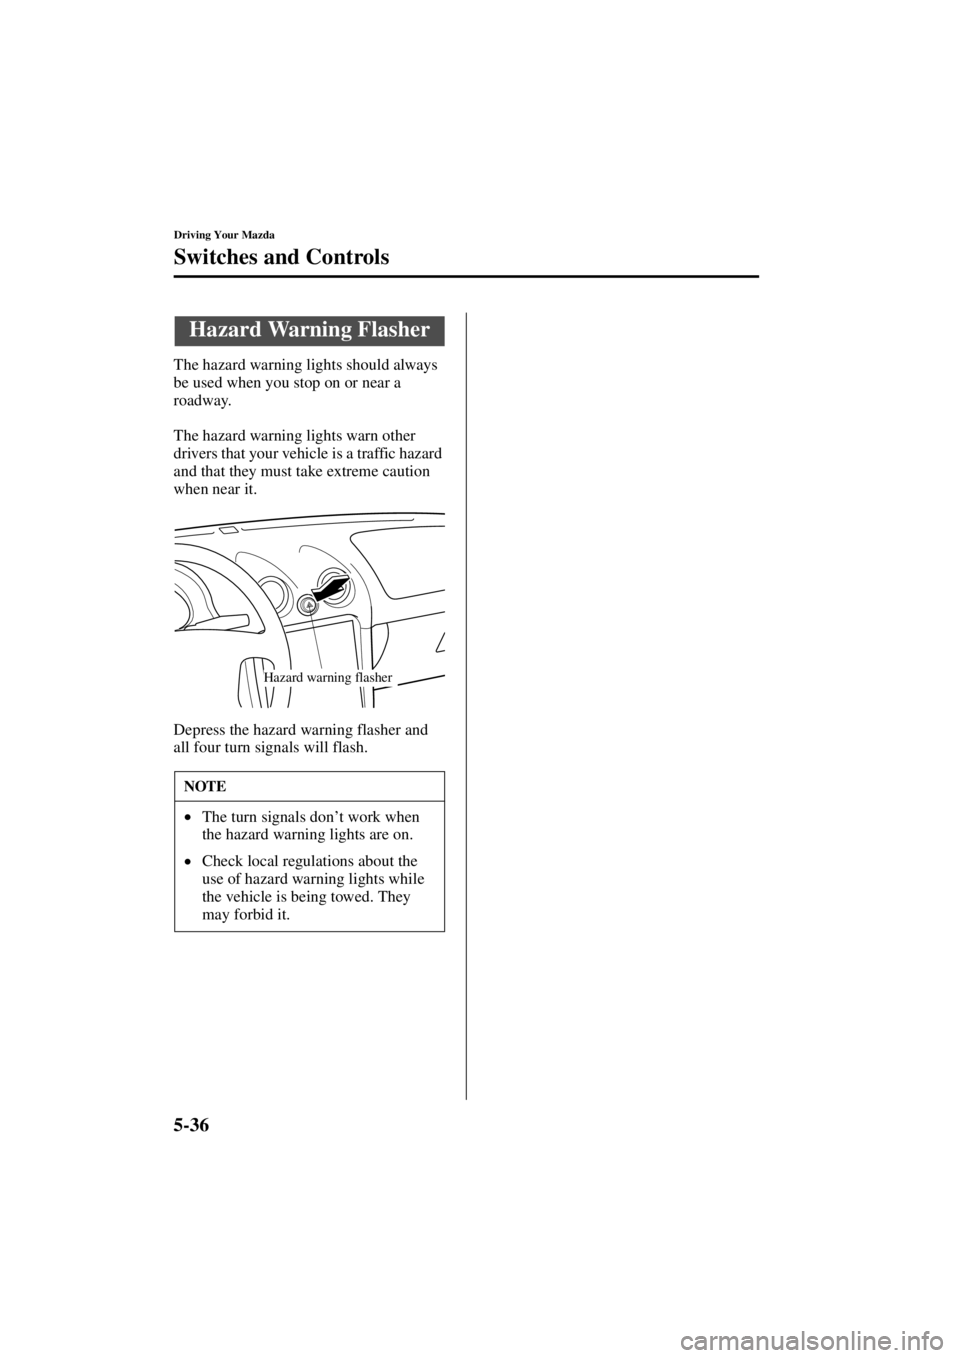 MAZDA MODEL SPEED MX-5 MIATA 2004  Owners Manual 5-36
Driving Your Mazda
Switches and Controls
Form No. 8T02-EA-03L
The hazard warning lights should always 
be used when you stop on or near a 
roadway.
The hazard warning lights warn other 
drivers t